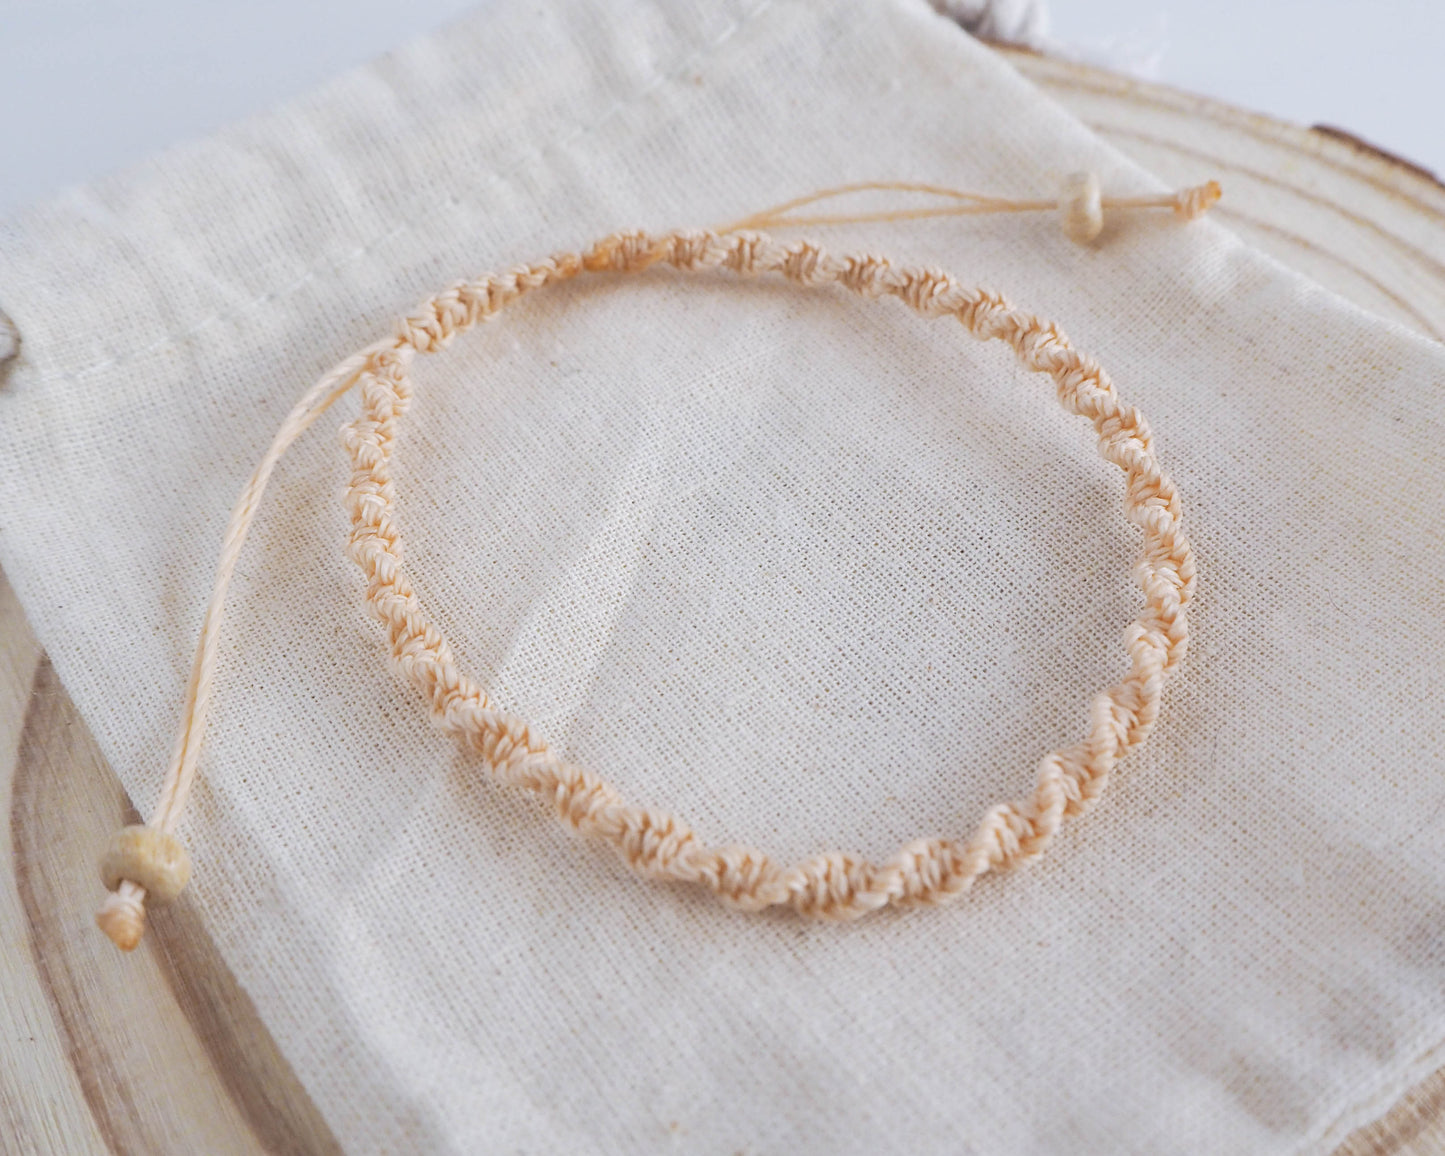 Unique and Stylish Beach Jewelry: Knotted Cord Bracelets